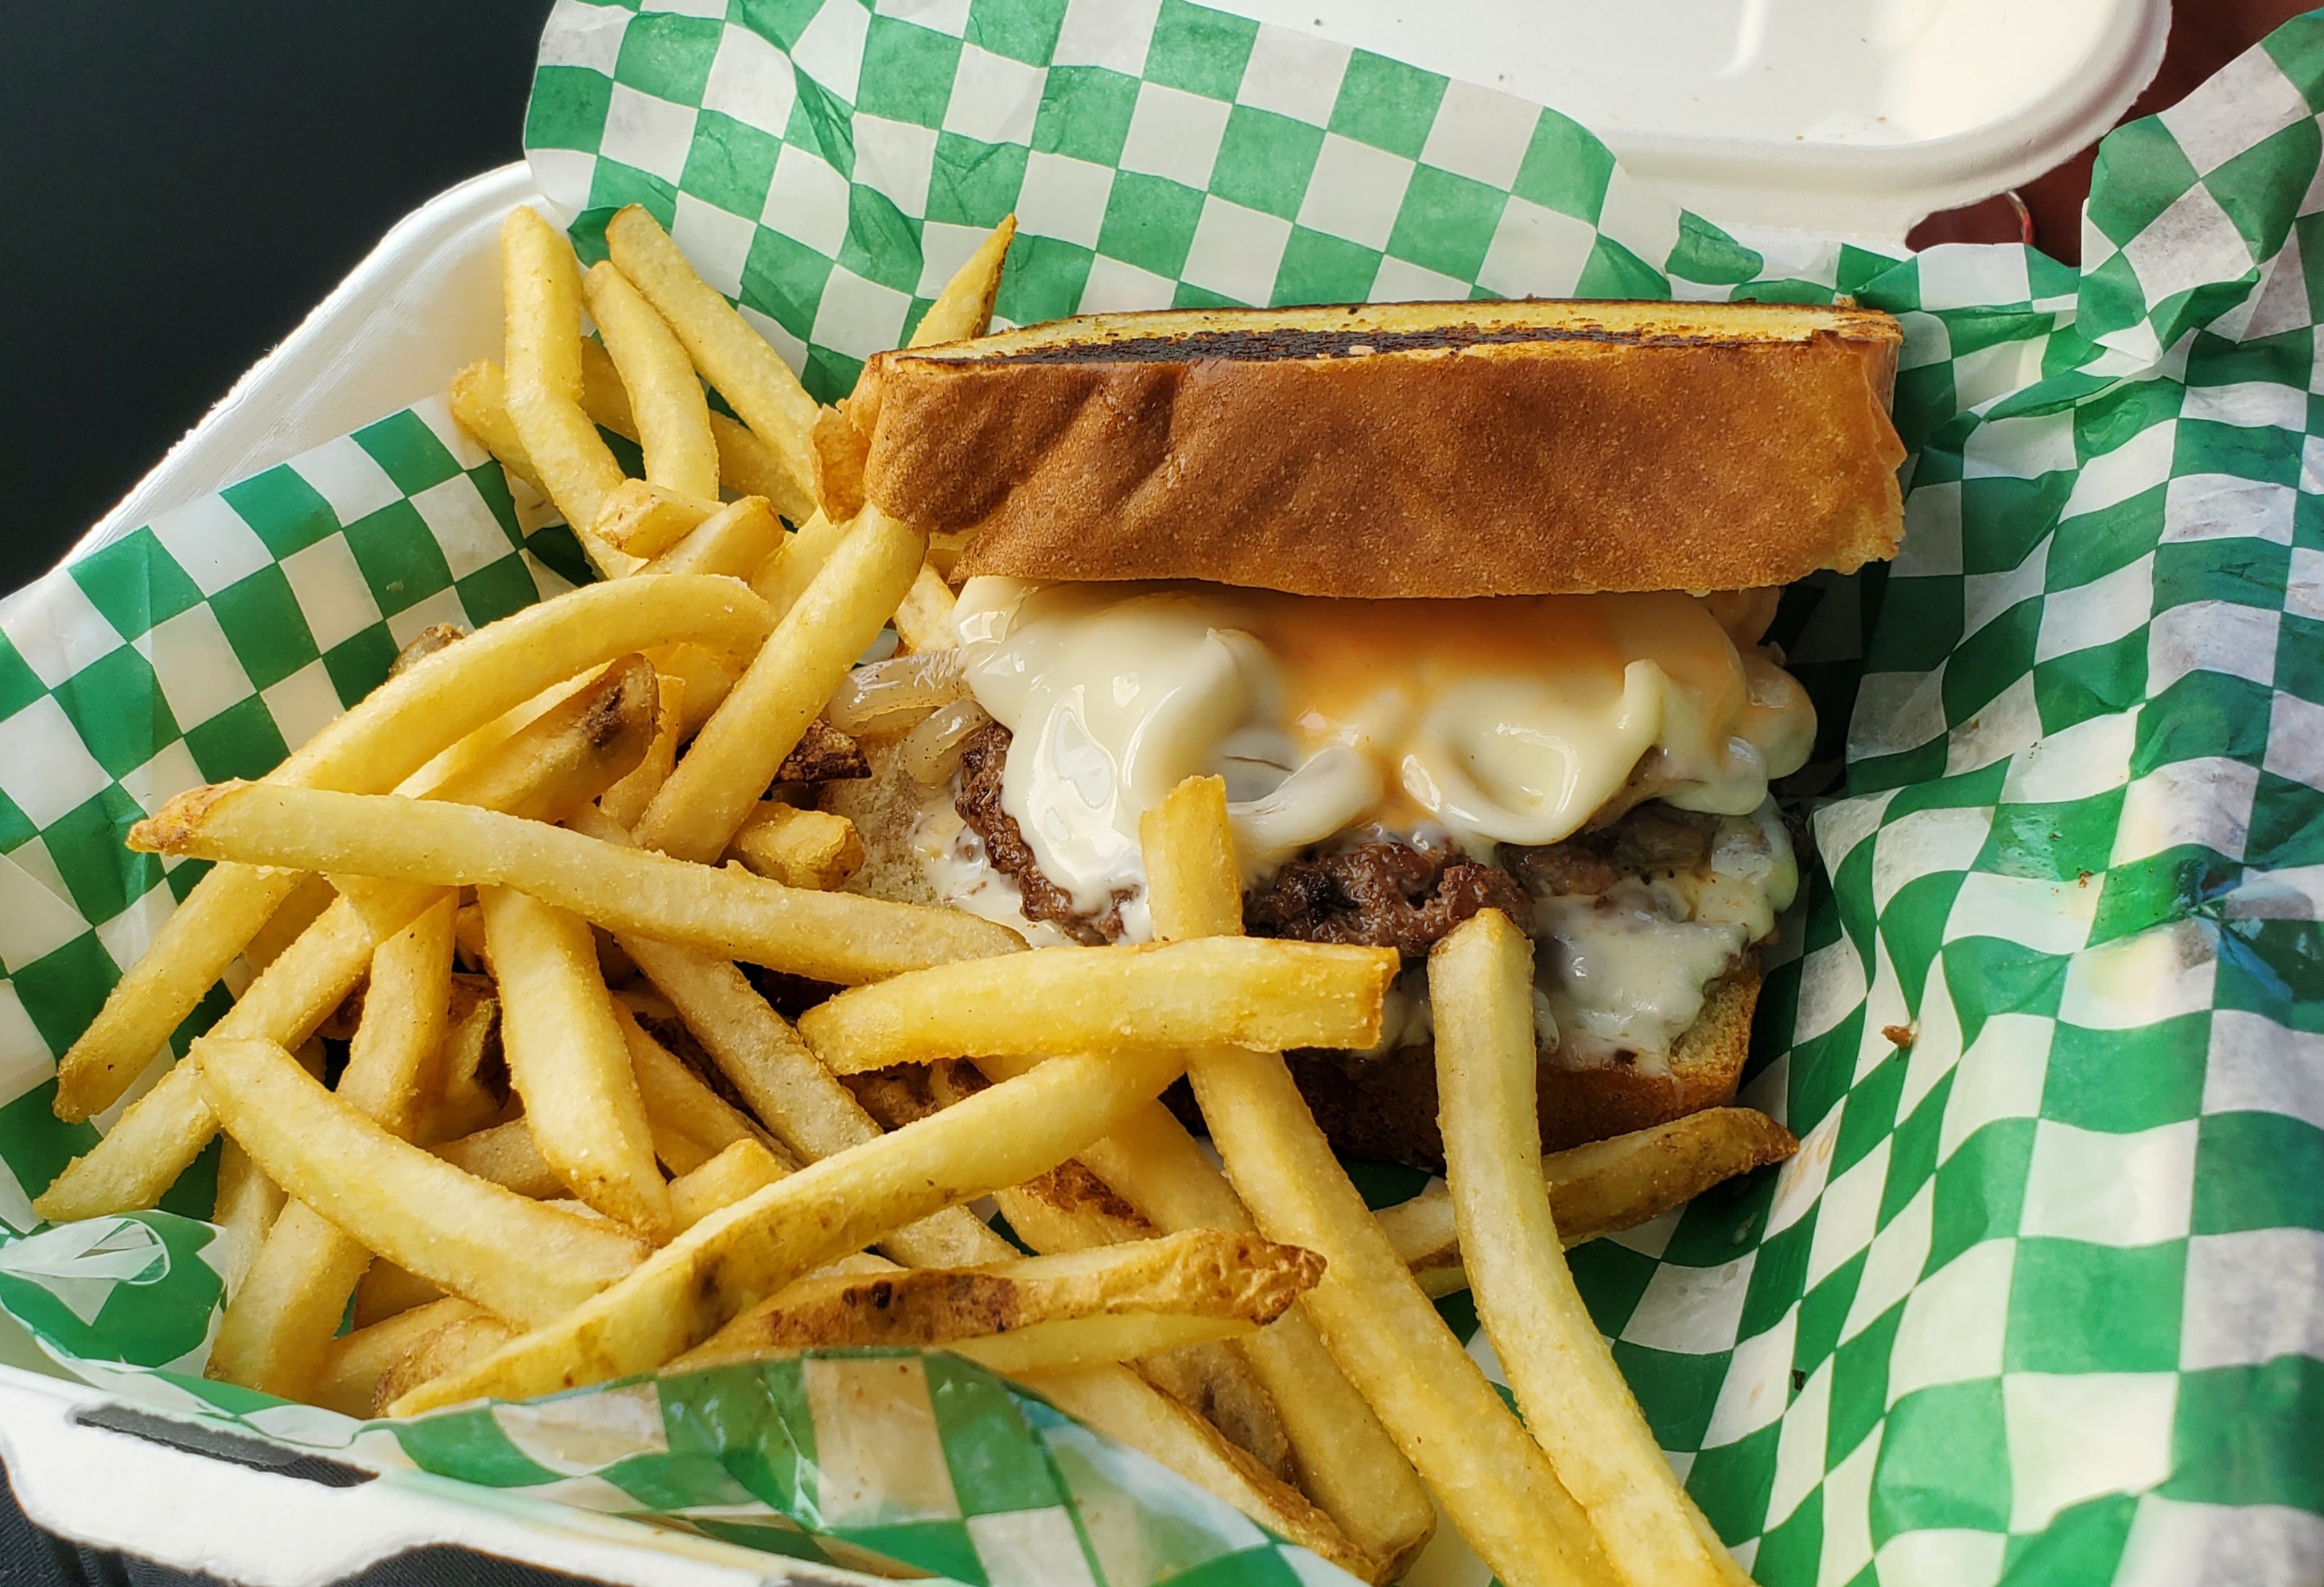 In a white styrofoam square takeout container lined with green and white checkered parchment paper, there is a burger with melted white cheese and a big portion of fries. Photo by Carl Busch.